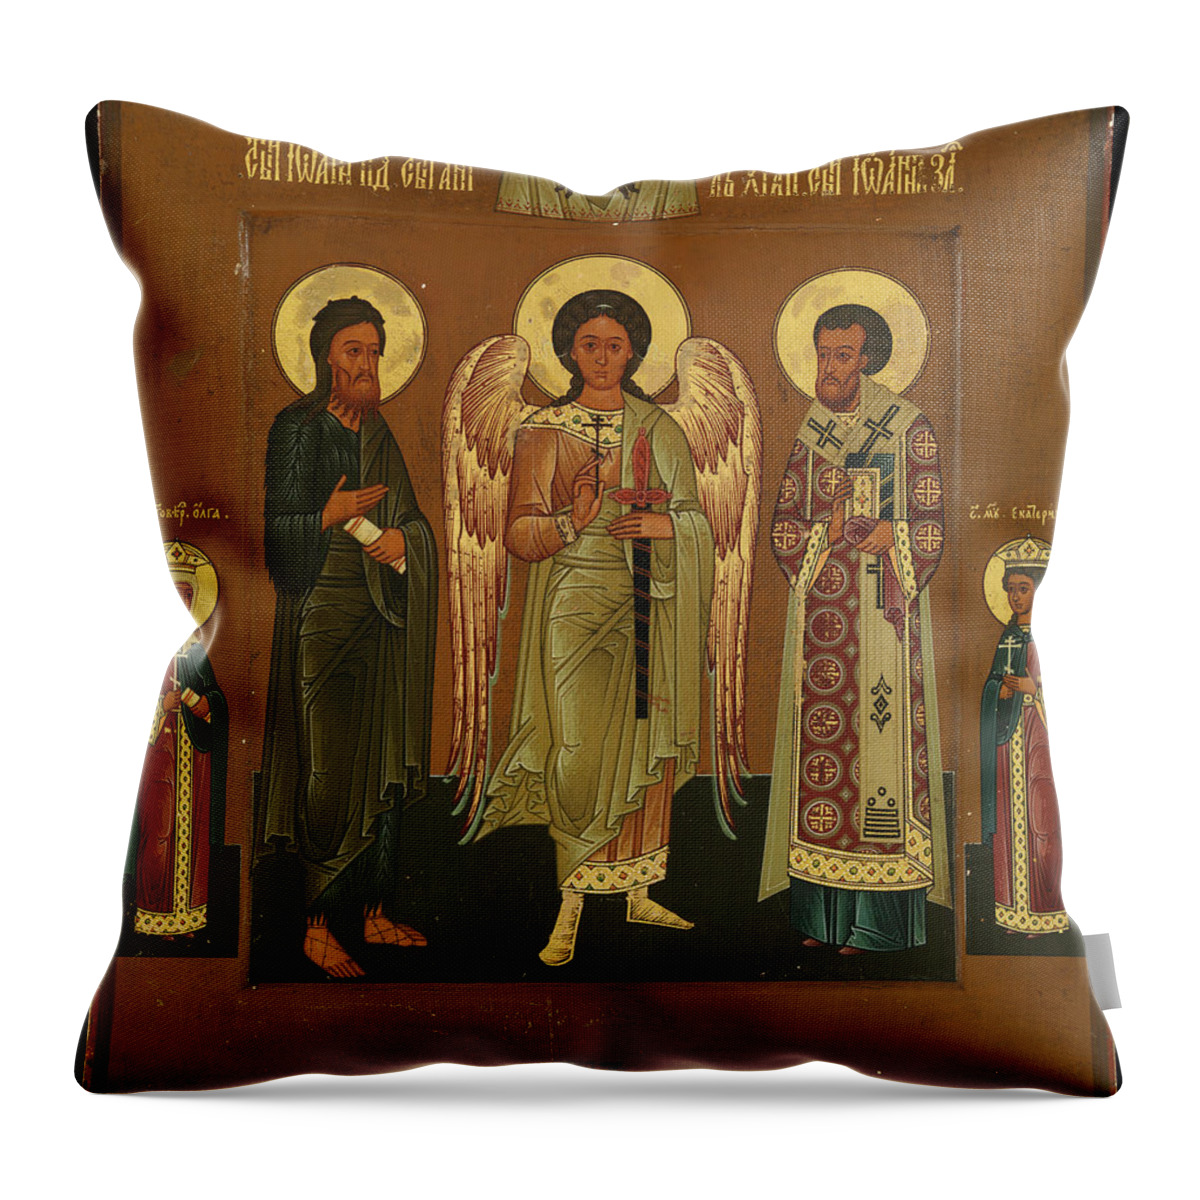 The Guardian Angel With St John The Baptist Throw Pillow featuring the painting The Guardian Angel With St John The Baptist by MotionAge Designs